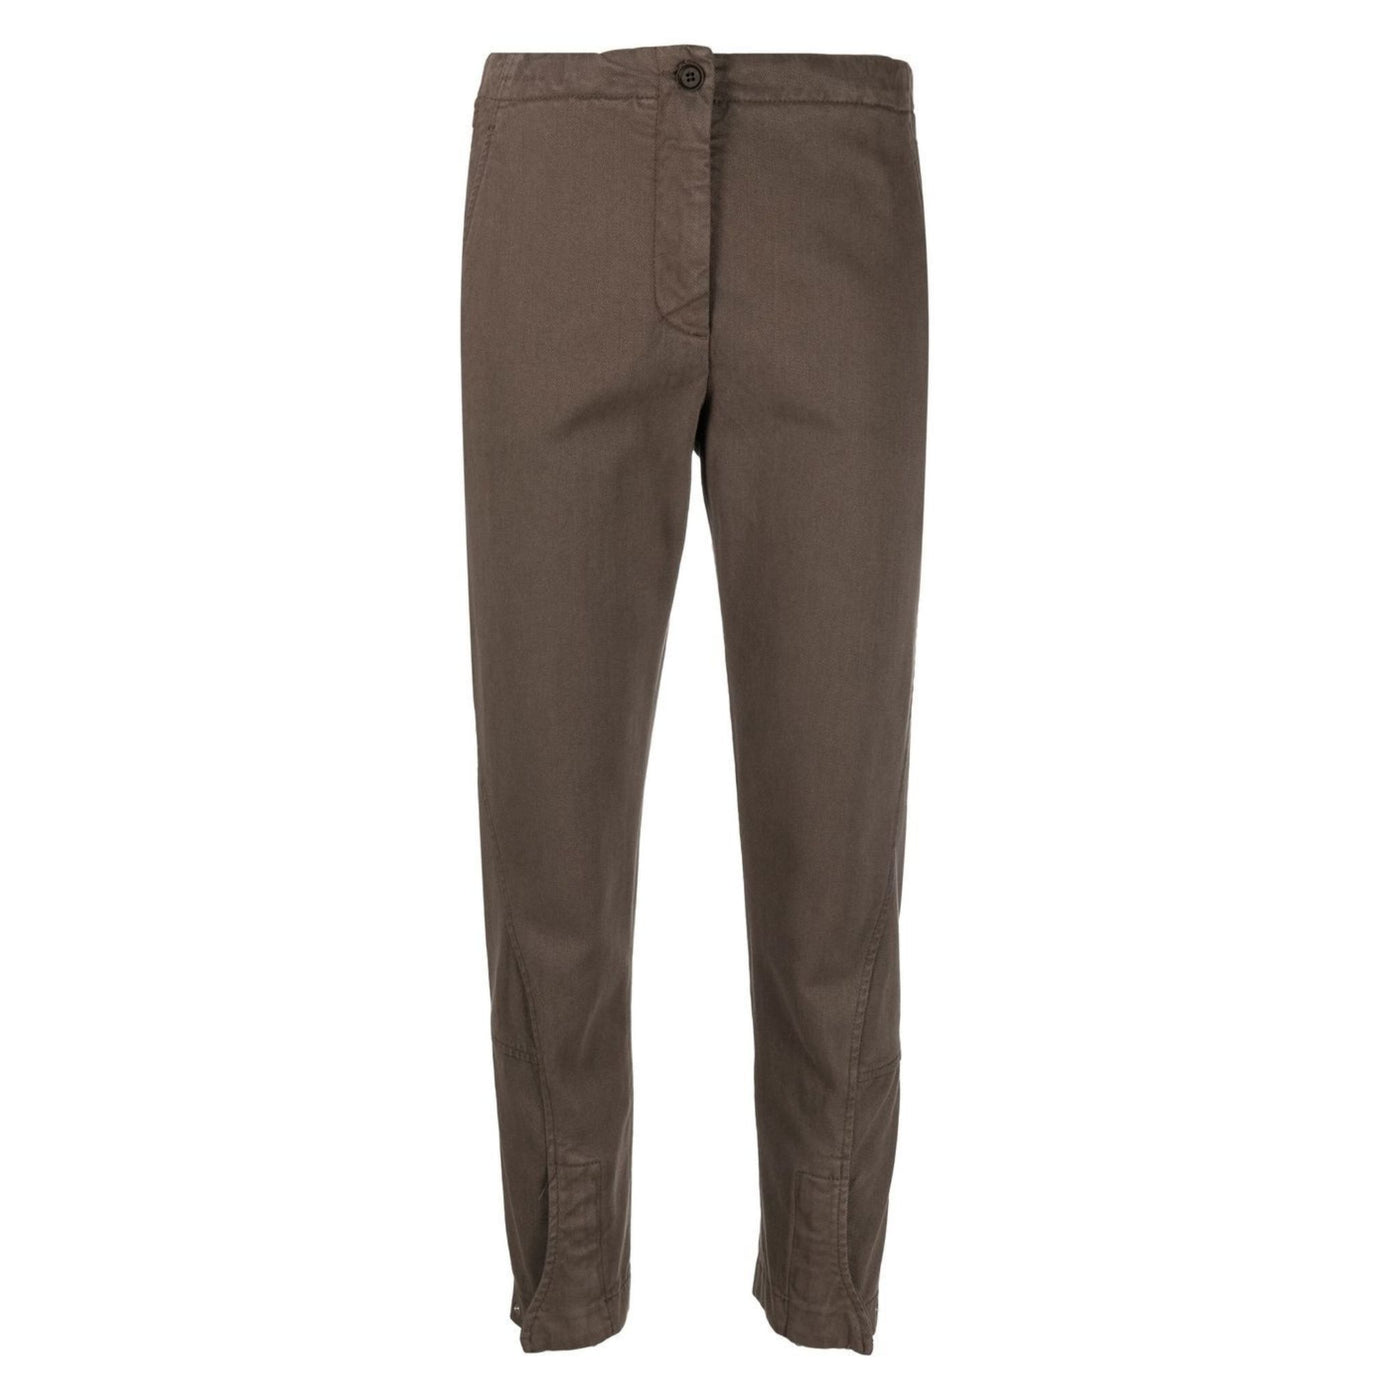 Short tapered women's trousers 